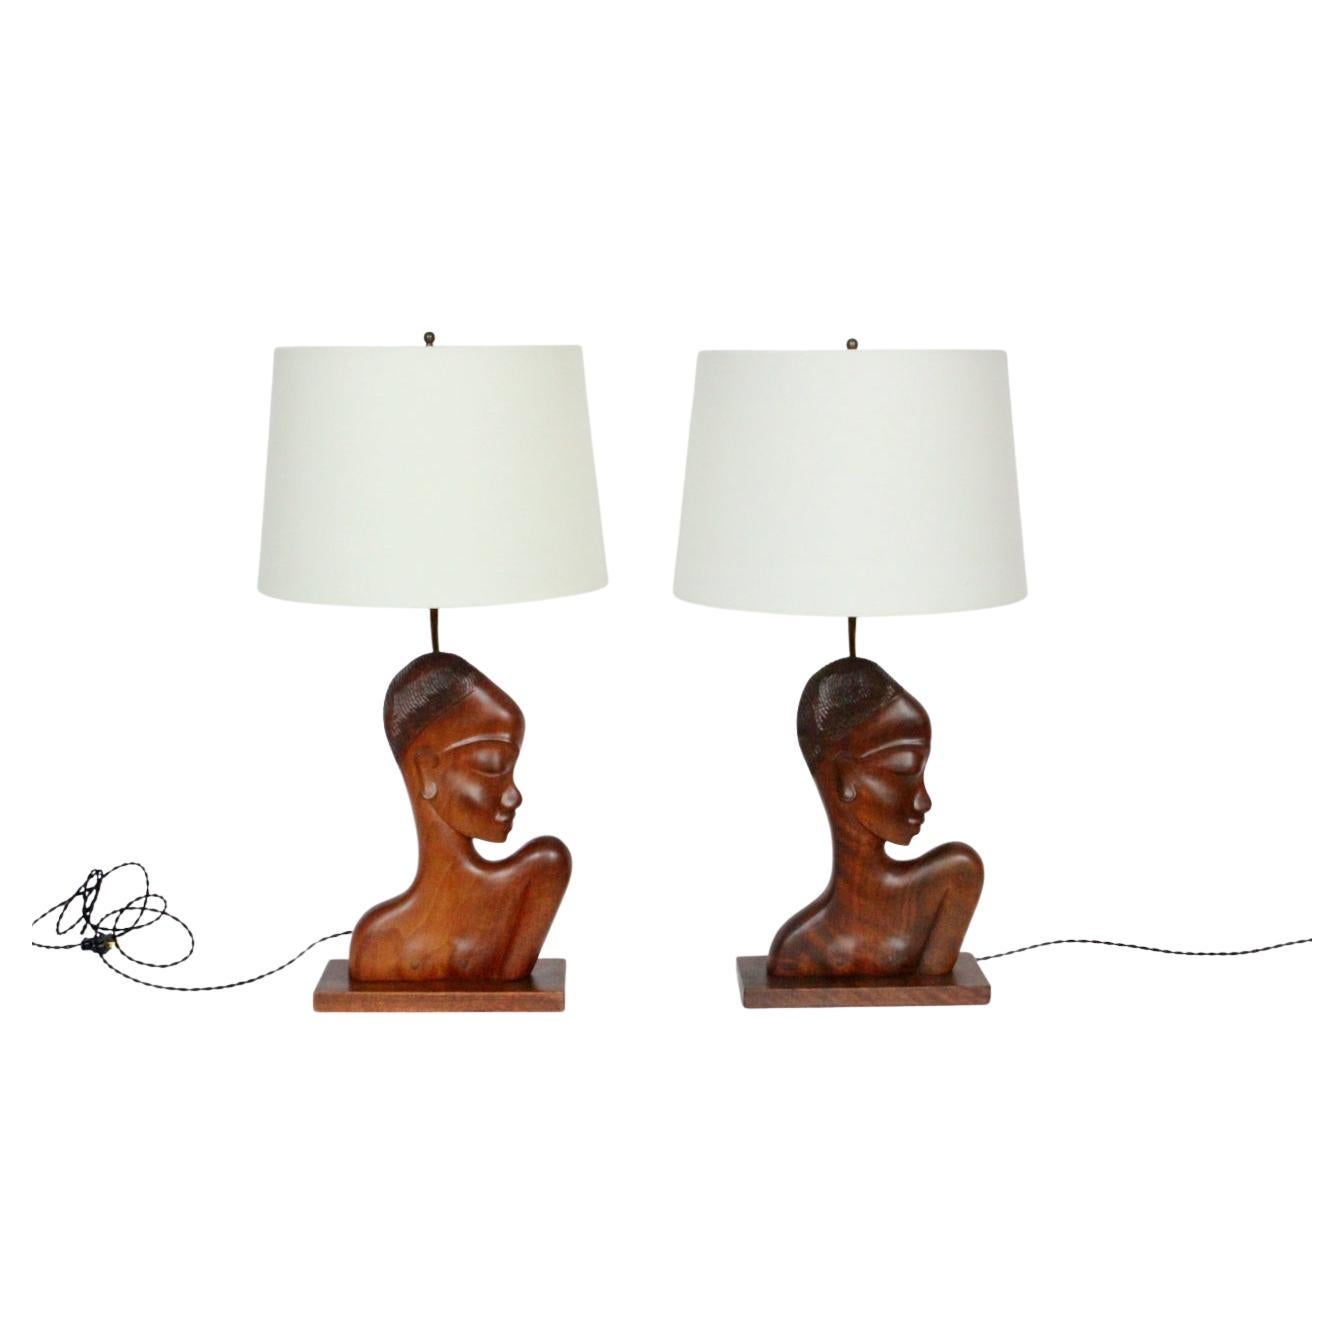 Pair of carved mahogany female Nubian Bust table lamps by Franz Hagenauer. Featuring handcrafted smooth solid Mahogany figural Negress sculptural figures with highly formalized features in low relief, a top rectangular Mahogany (4.5D x 10.75W)